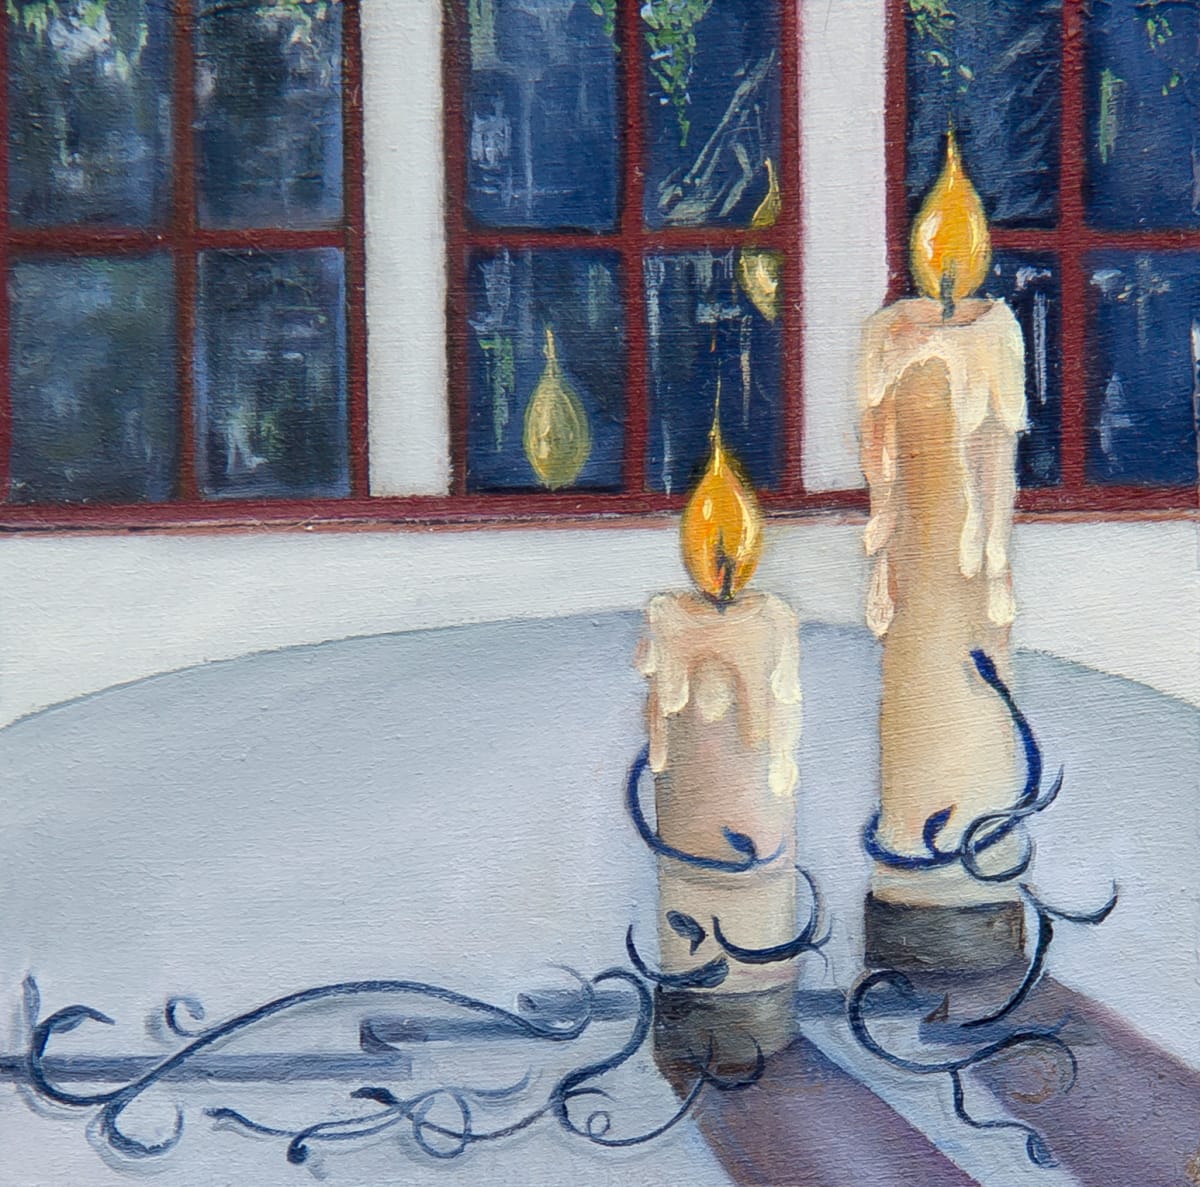 I Do Not Know the Meaning of All Things by Nila Jane Autry  Image: Double candles serve a double need. My violinist friend wanted something that looks like wedding decor for her website where she encourages people to hire her Chamber Orchestra to play at weddings and receptions...and Visions of the Arts provided me a small canvas to create a painting following the scripture verse, 1 Nephi 11:17 which reads, 'And I said unto him: I know that he loveth his children; nevertheless, I do not know the meaning of all things.' So after providing a high-res copy for my friends website, I donated this paintings to Vision of the Arts Fund. The original will be auctioned on Ebay April 19th - April 29th, 2023